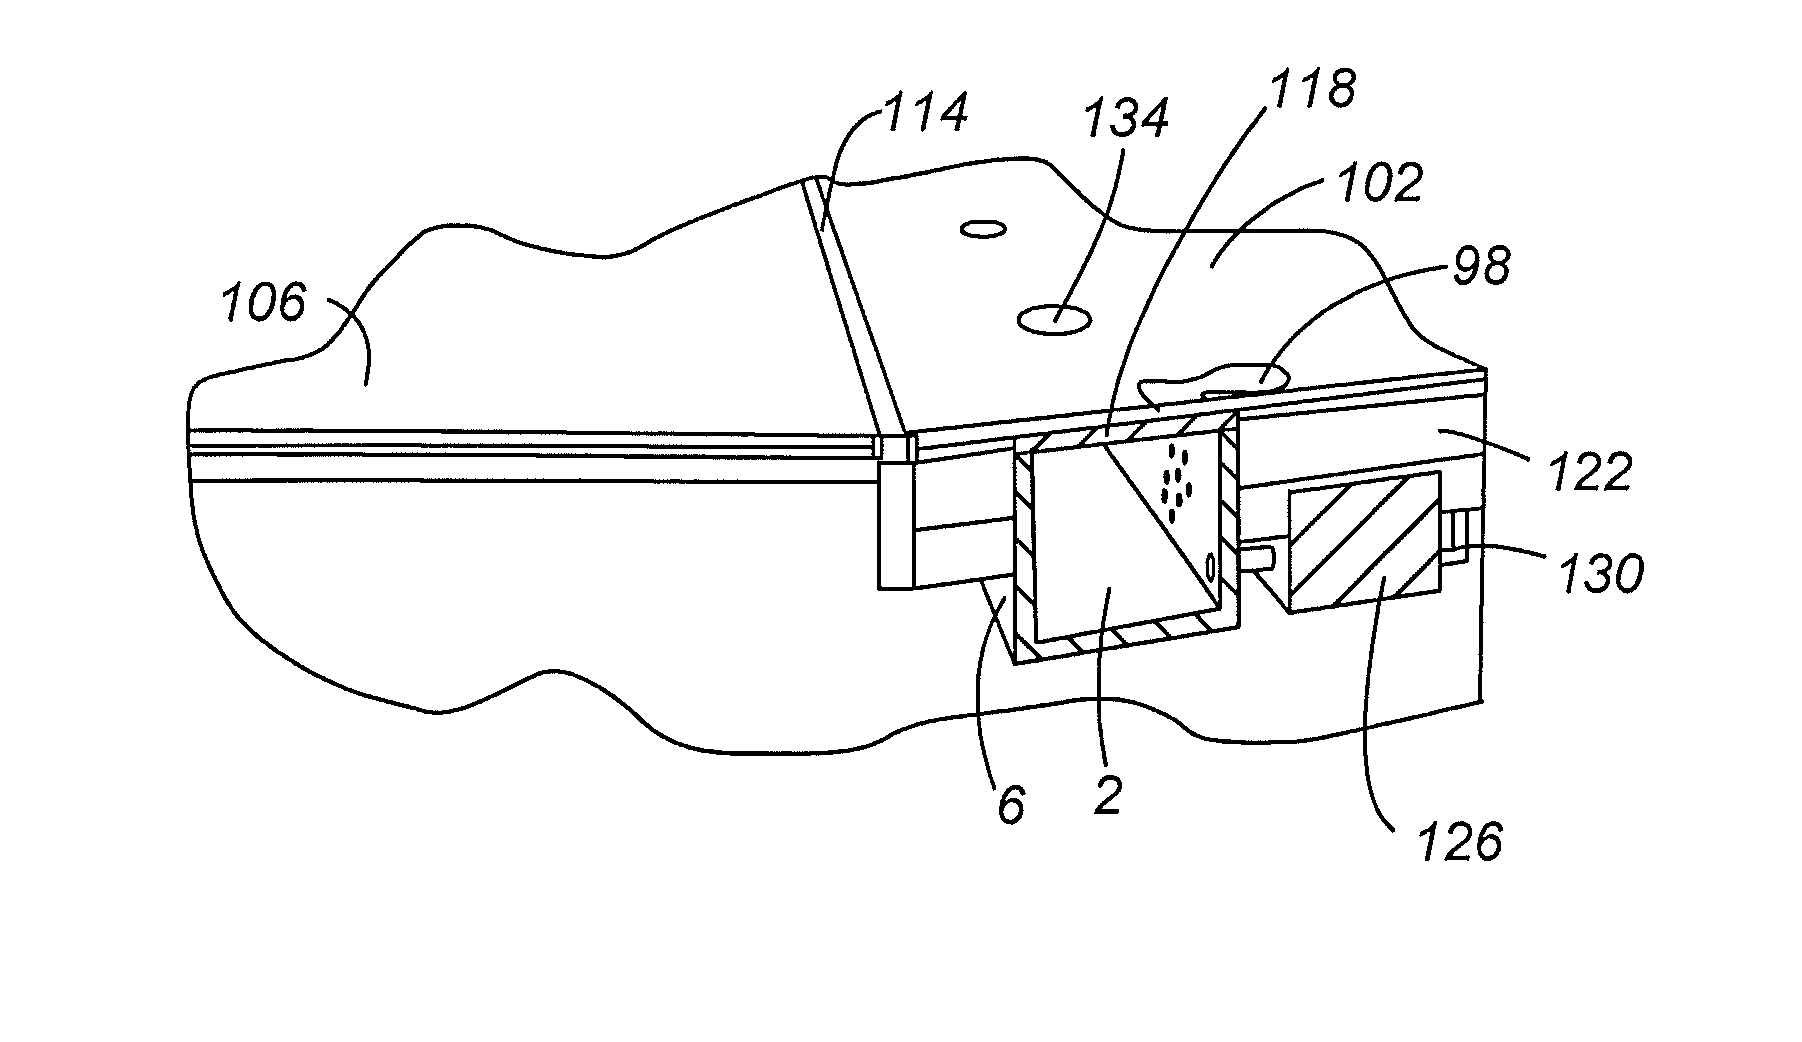 Method and apparatus for capturing, storing, and distributing storm water